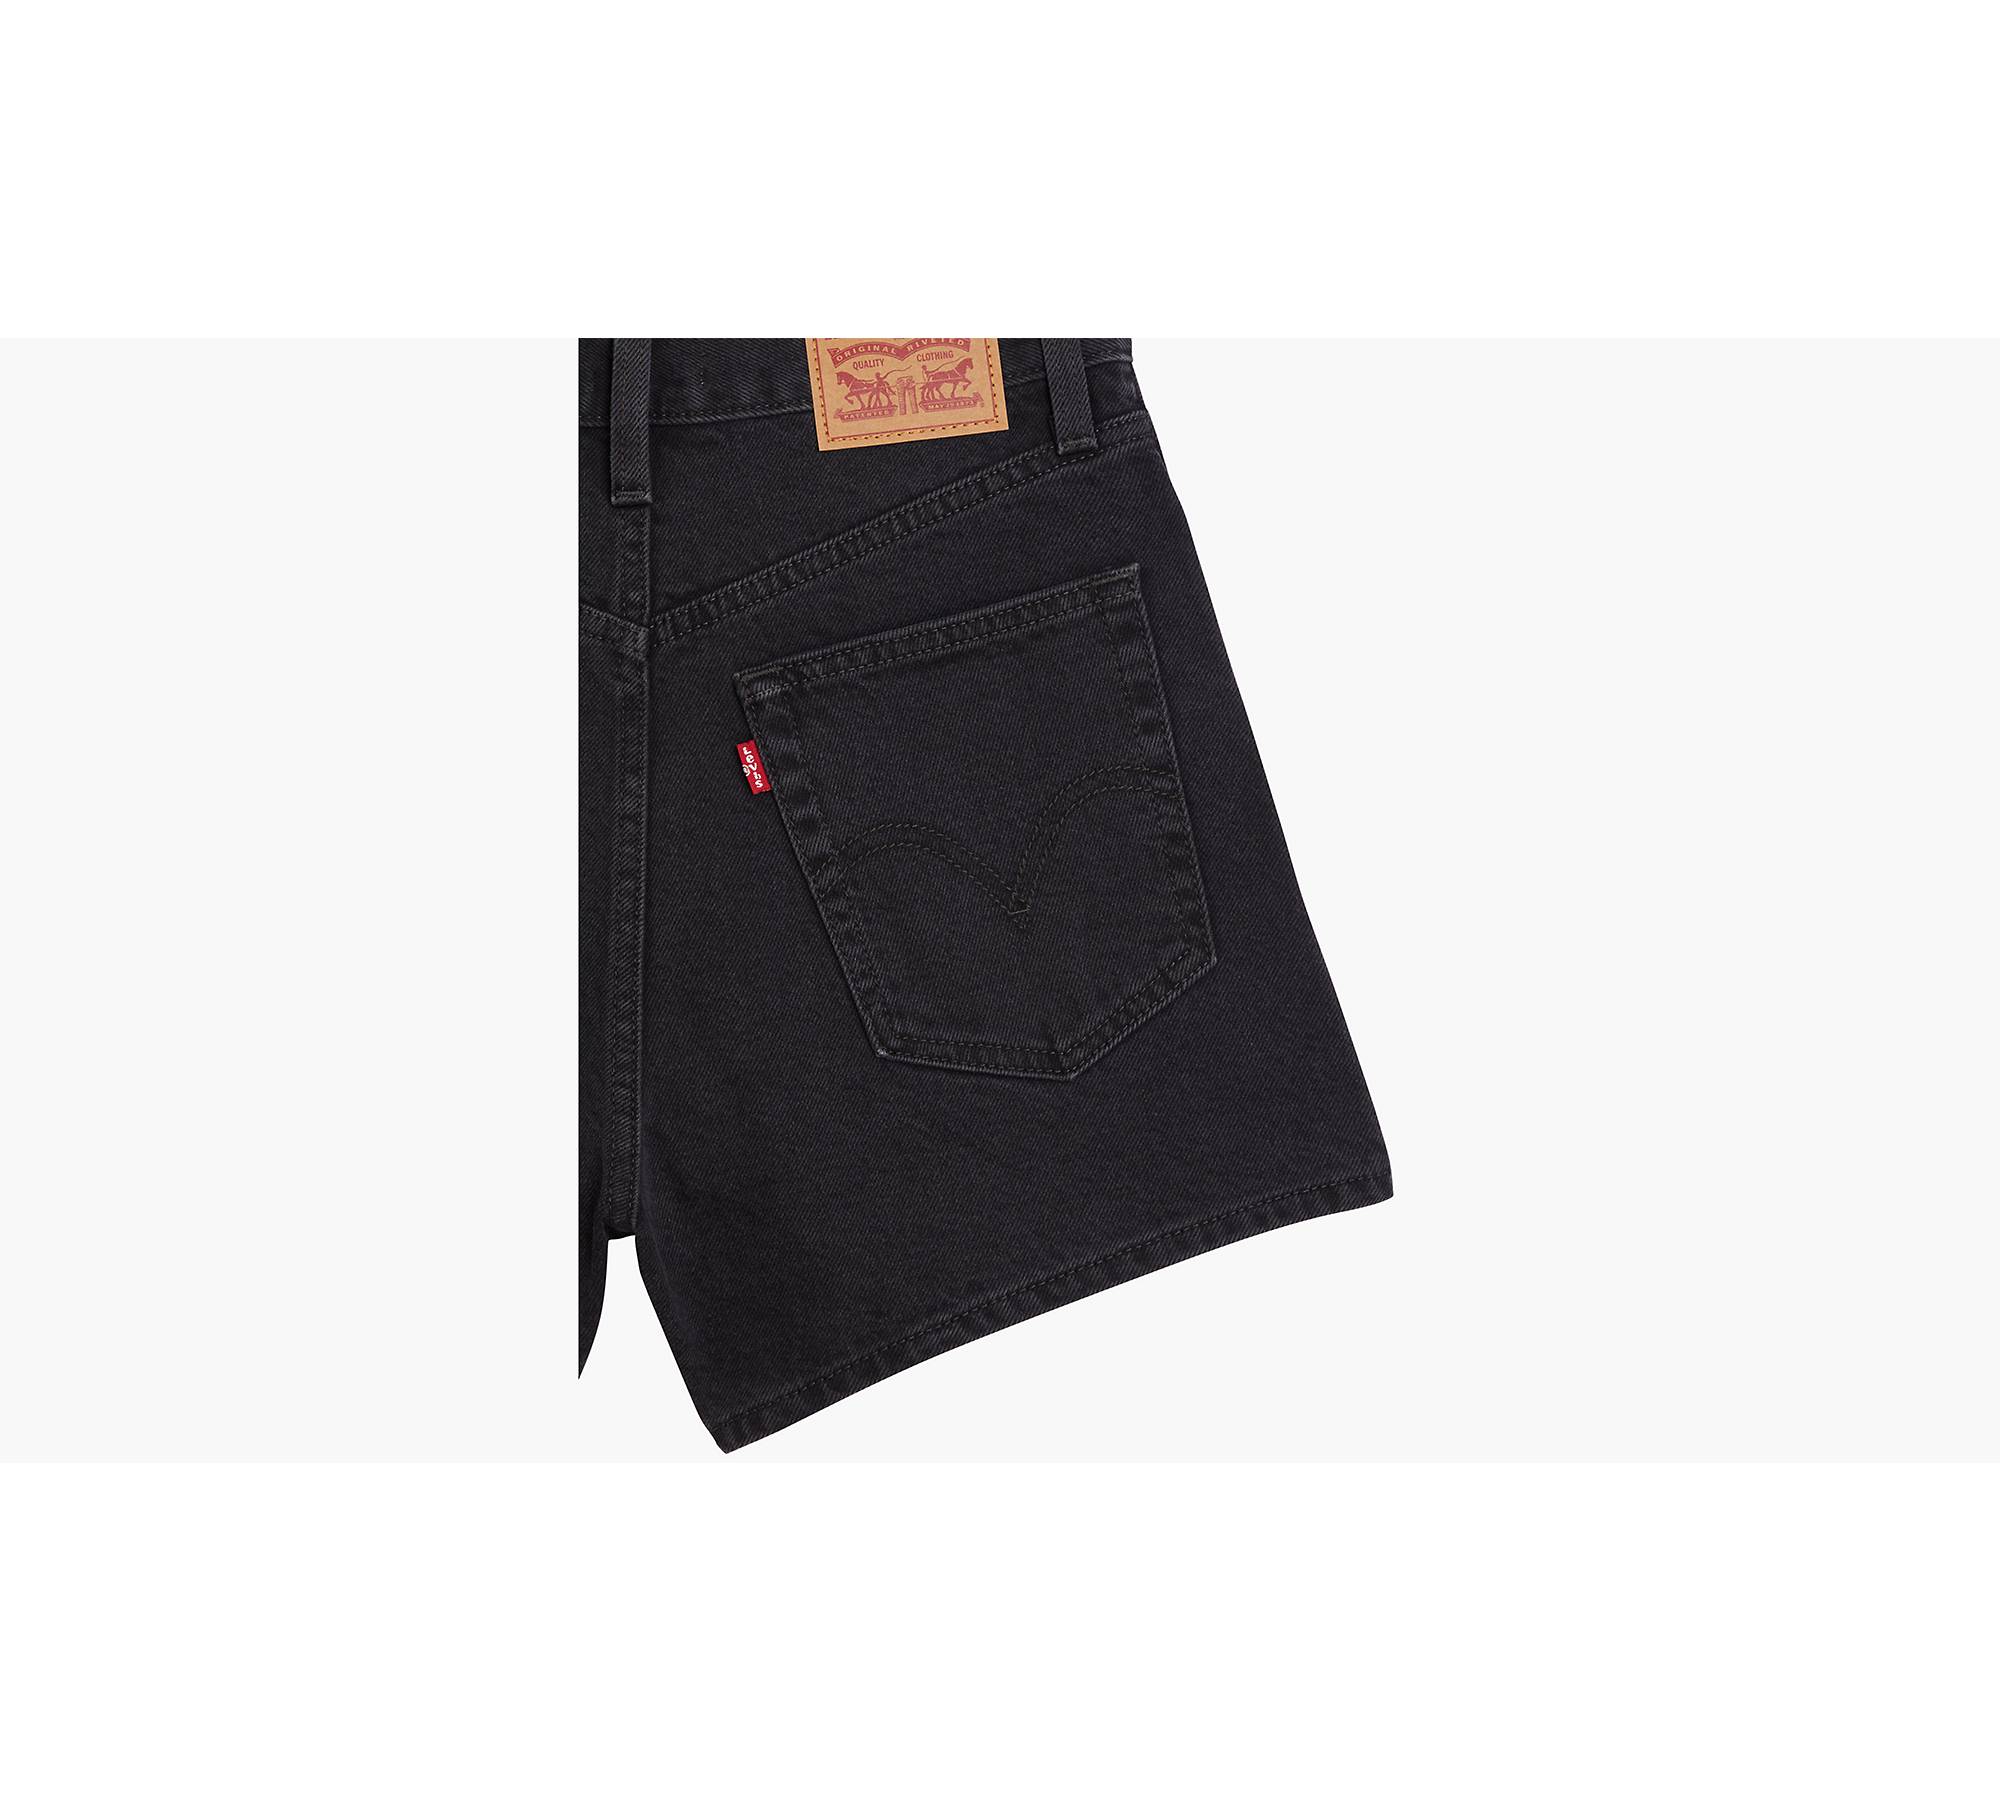 Levi’s High Waisted Mom A Line Jean Shorts in Wonderful Black Size 30 NEW